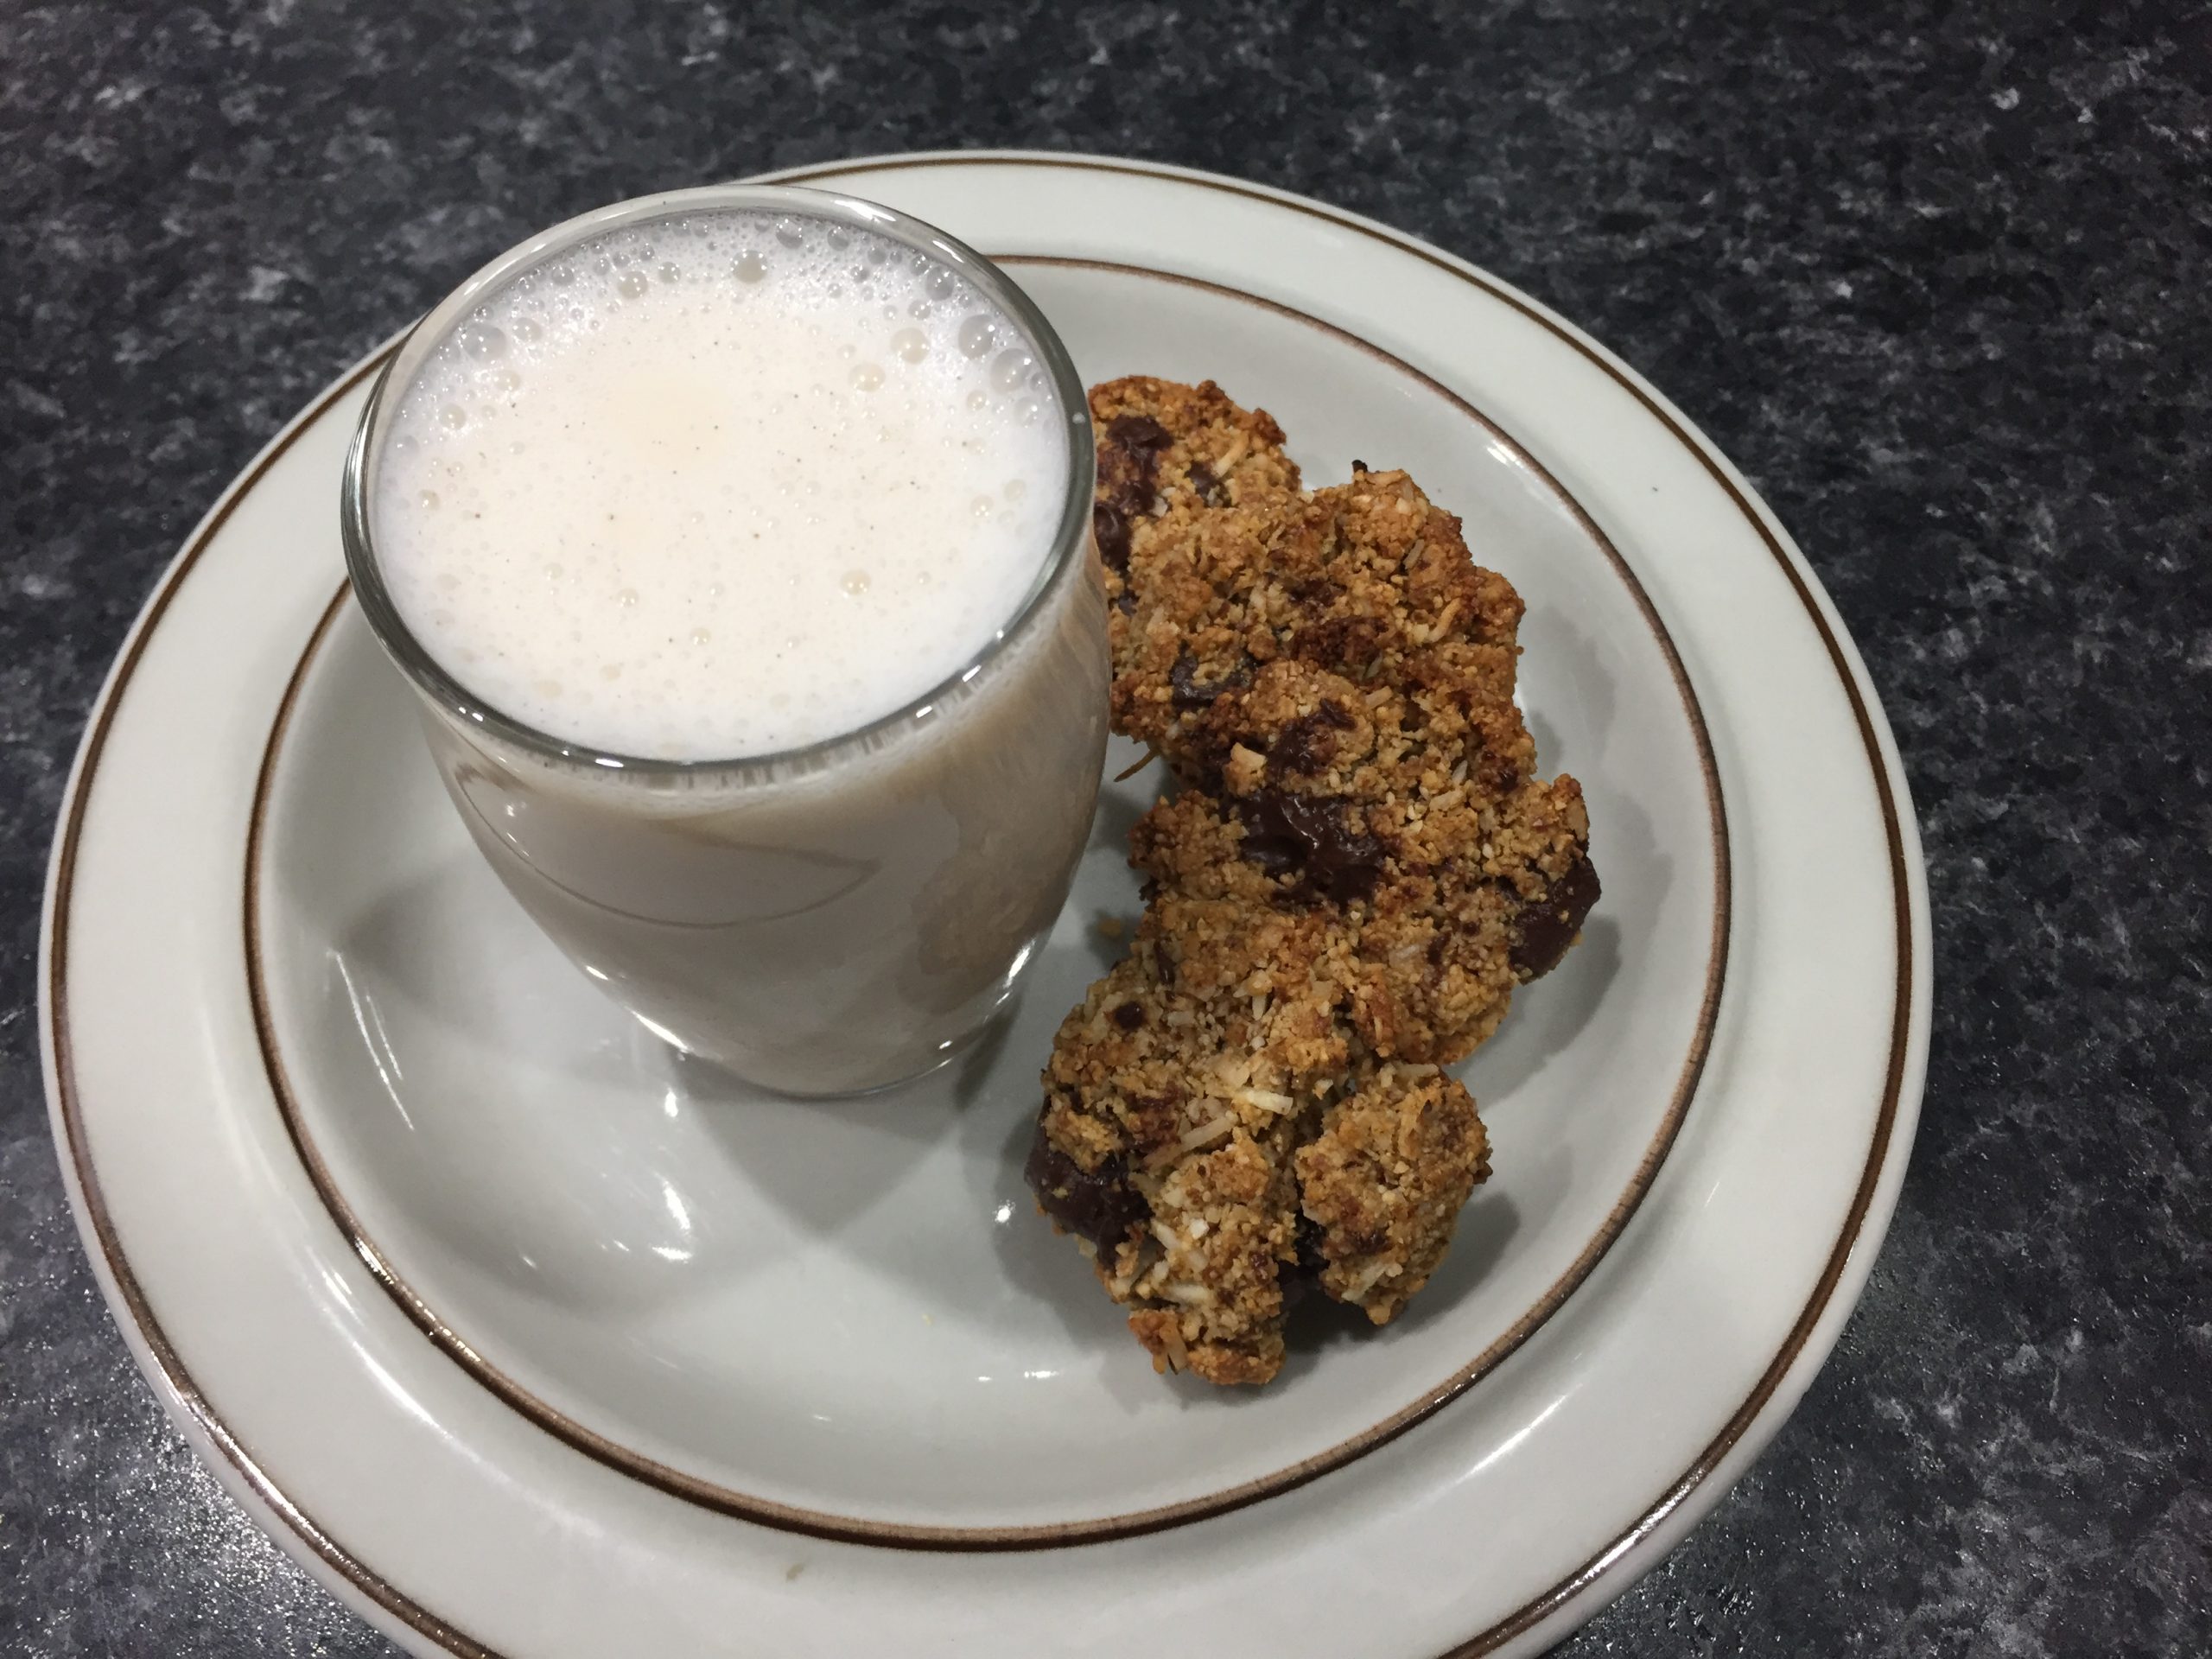 plastic pollution-inspired DIY almond milk and cookies made with almond pulp